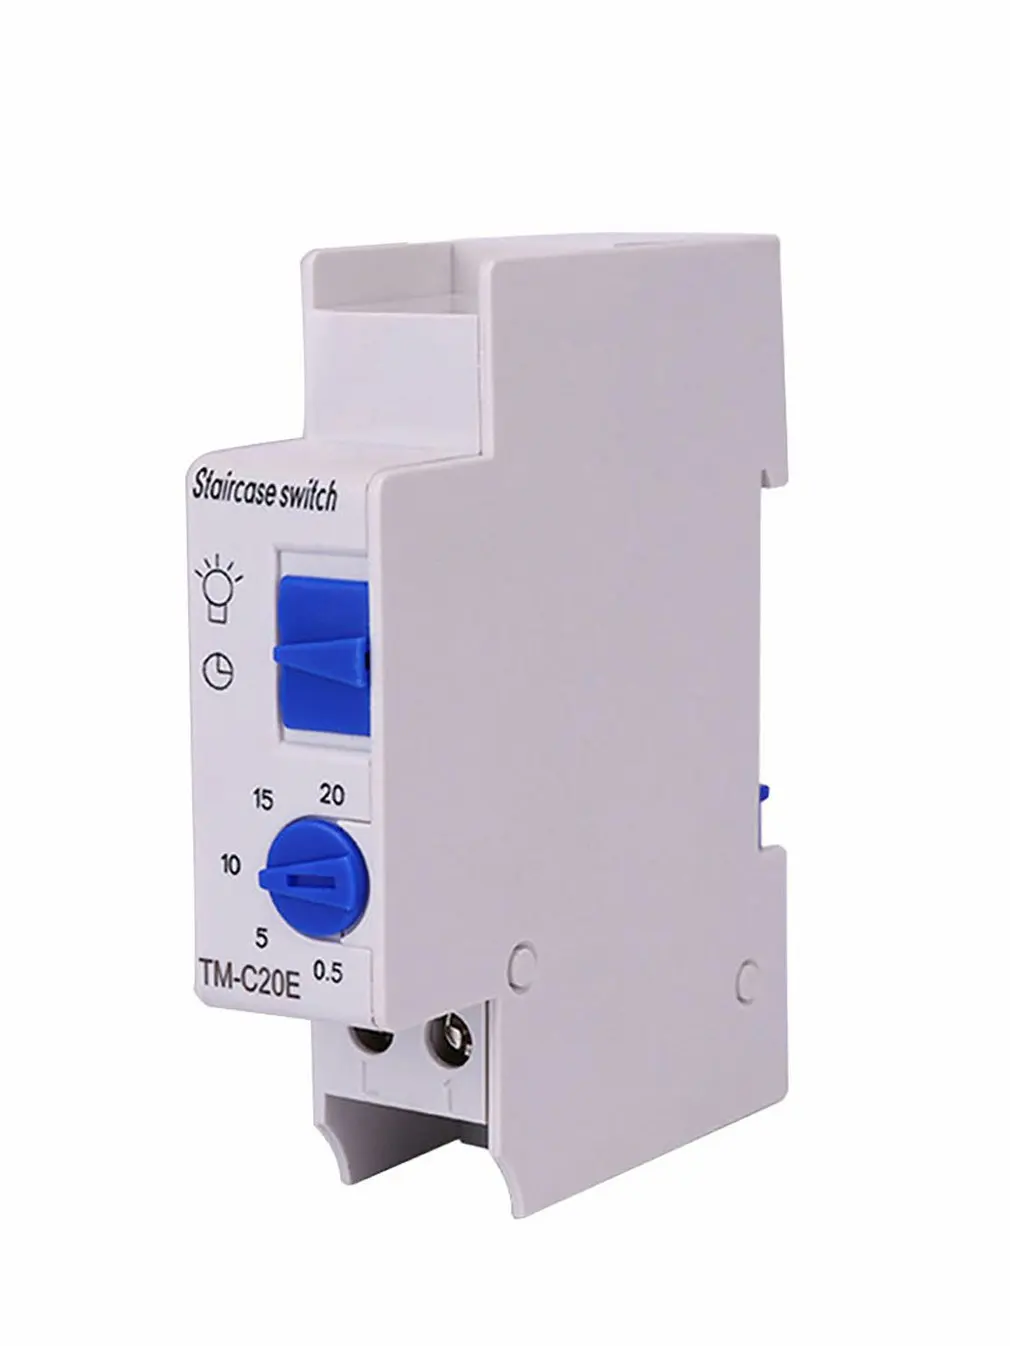 

TM-C20E 20 Minutes Stair Light Delay Timer DHC Relay Normally Open Contact Ad Timer Switch Timer Staircase Timer Mechanical